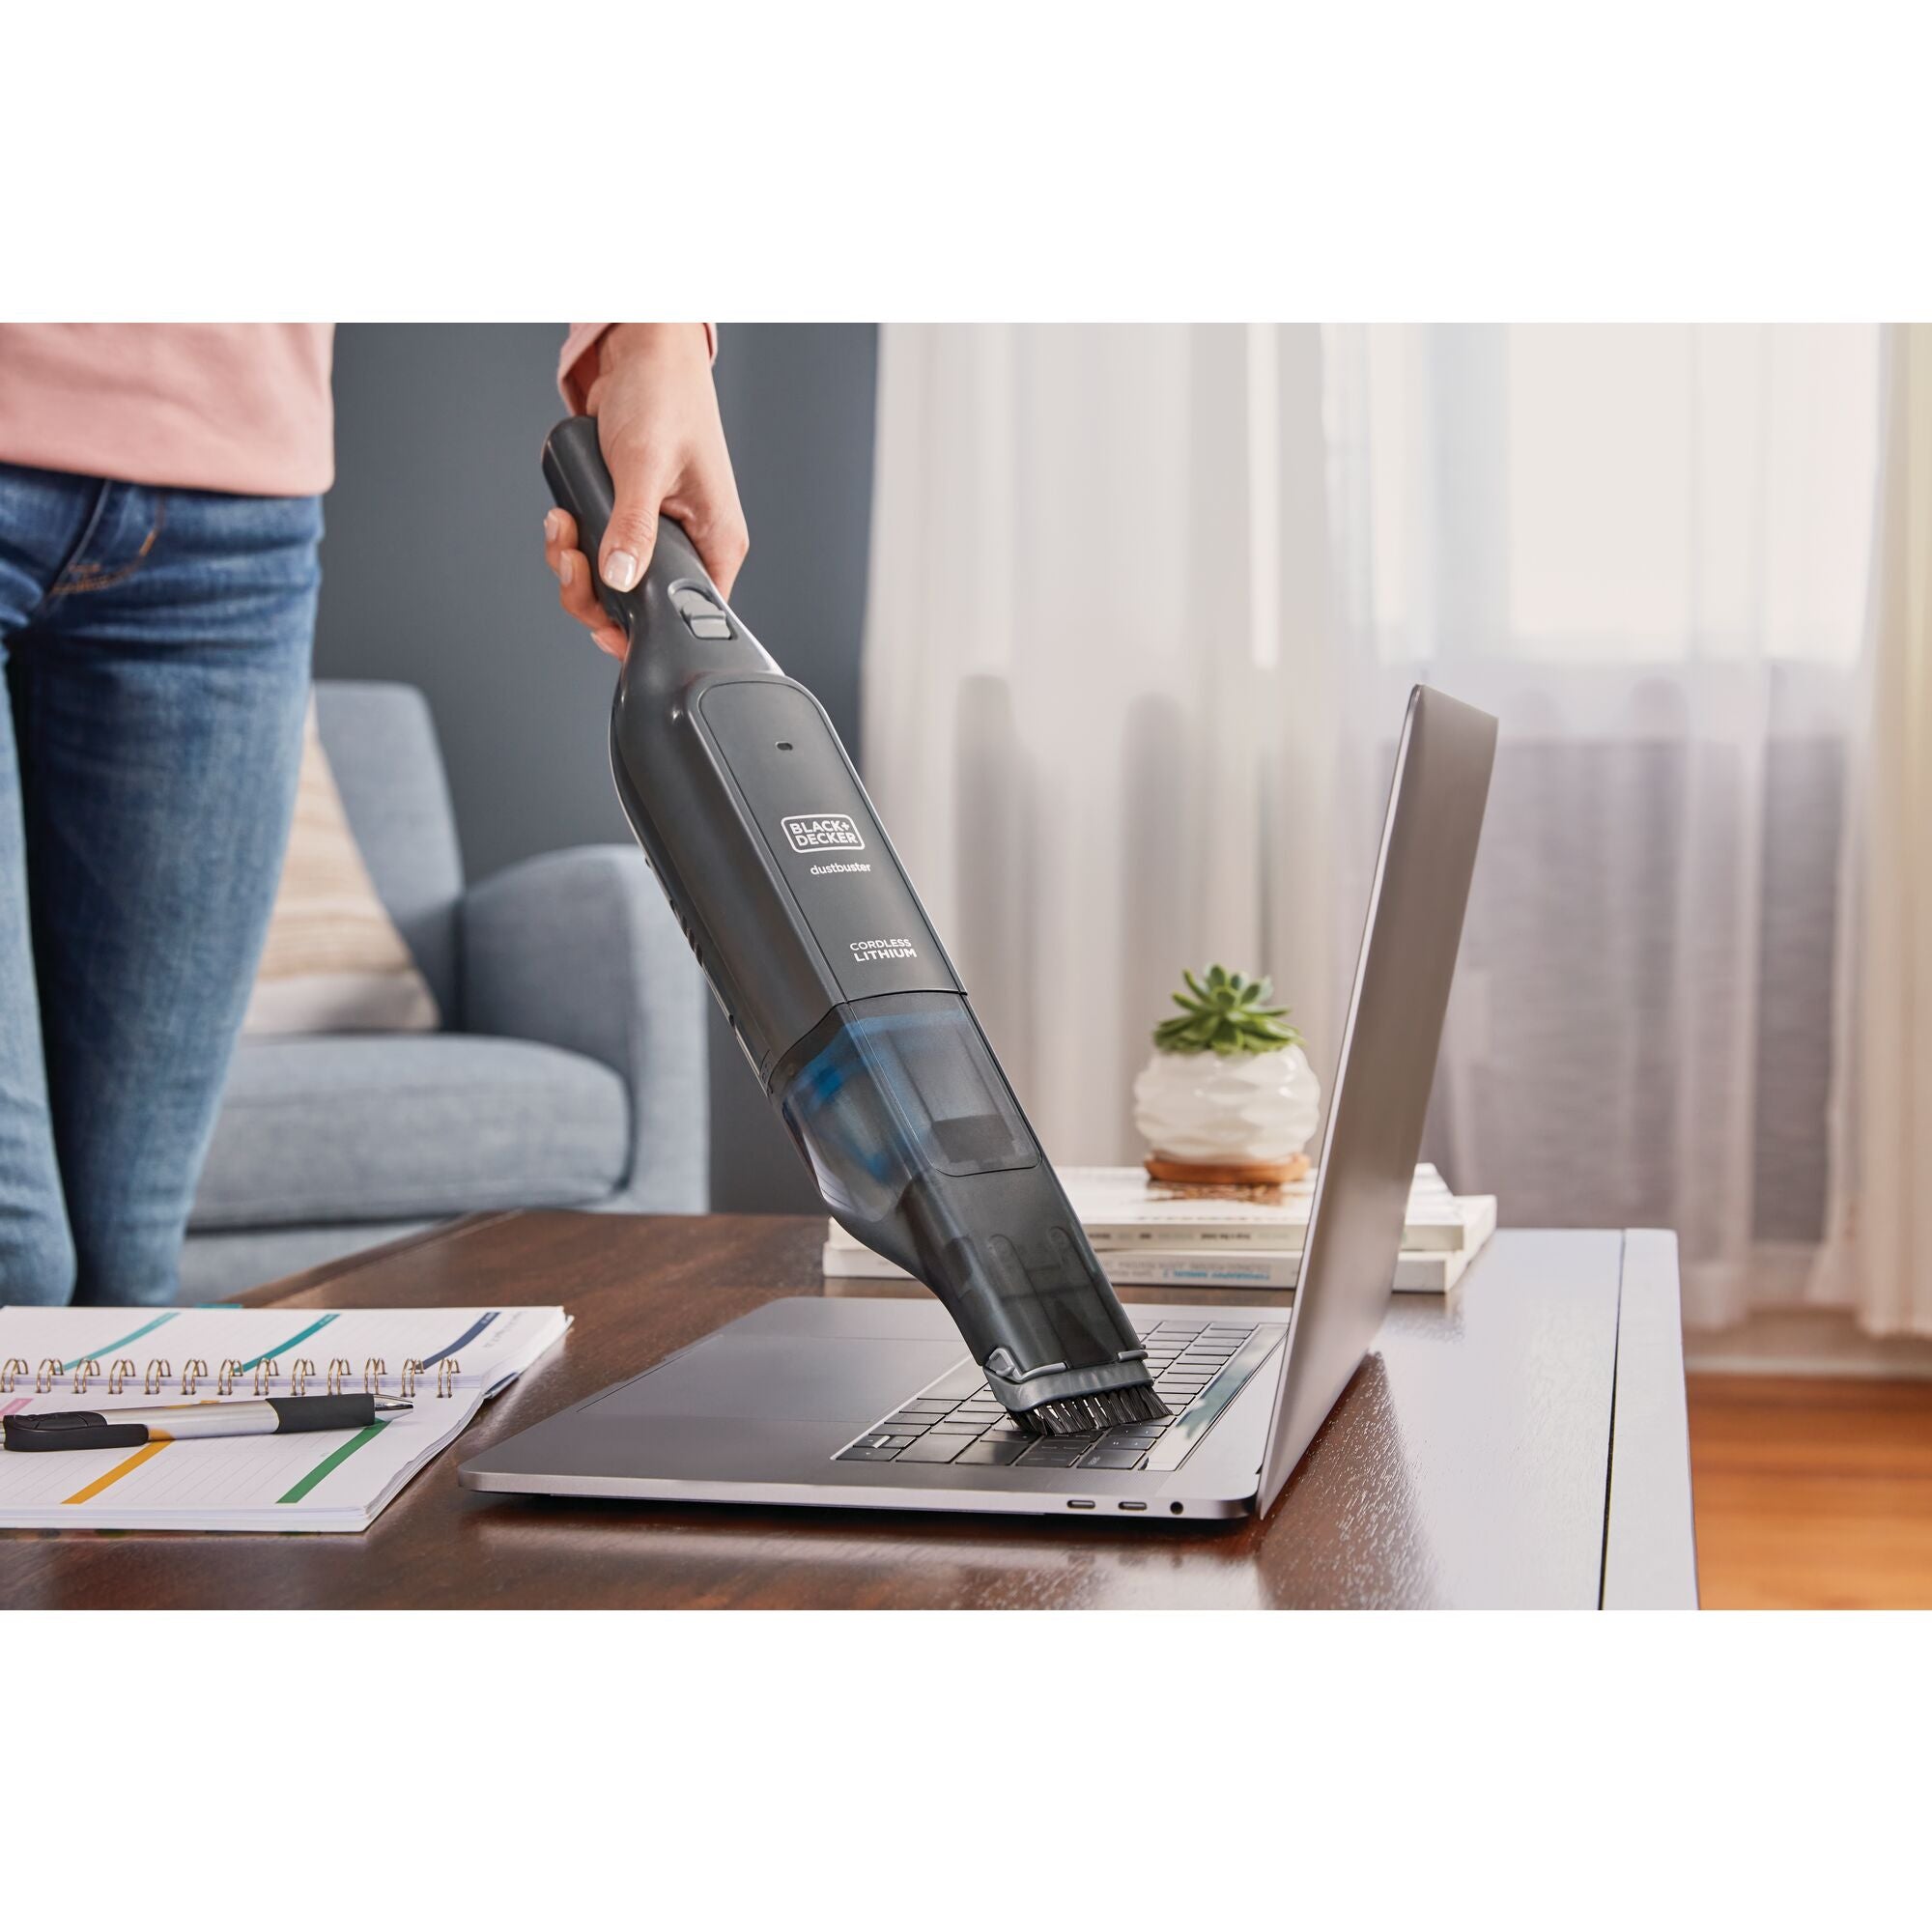 Dustbuster Cordless Hand Vacuum Advancedclean Slim With Charger, Filter And  Brush Crevice Tool